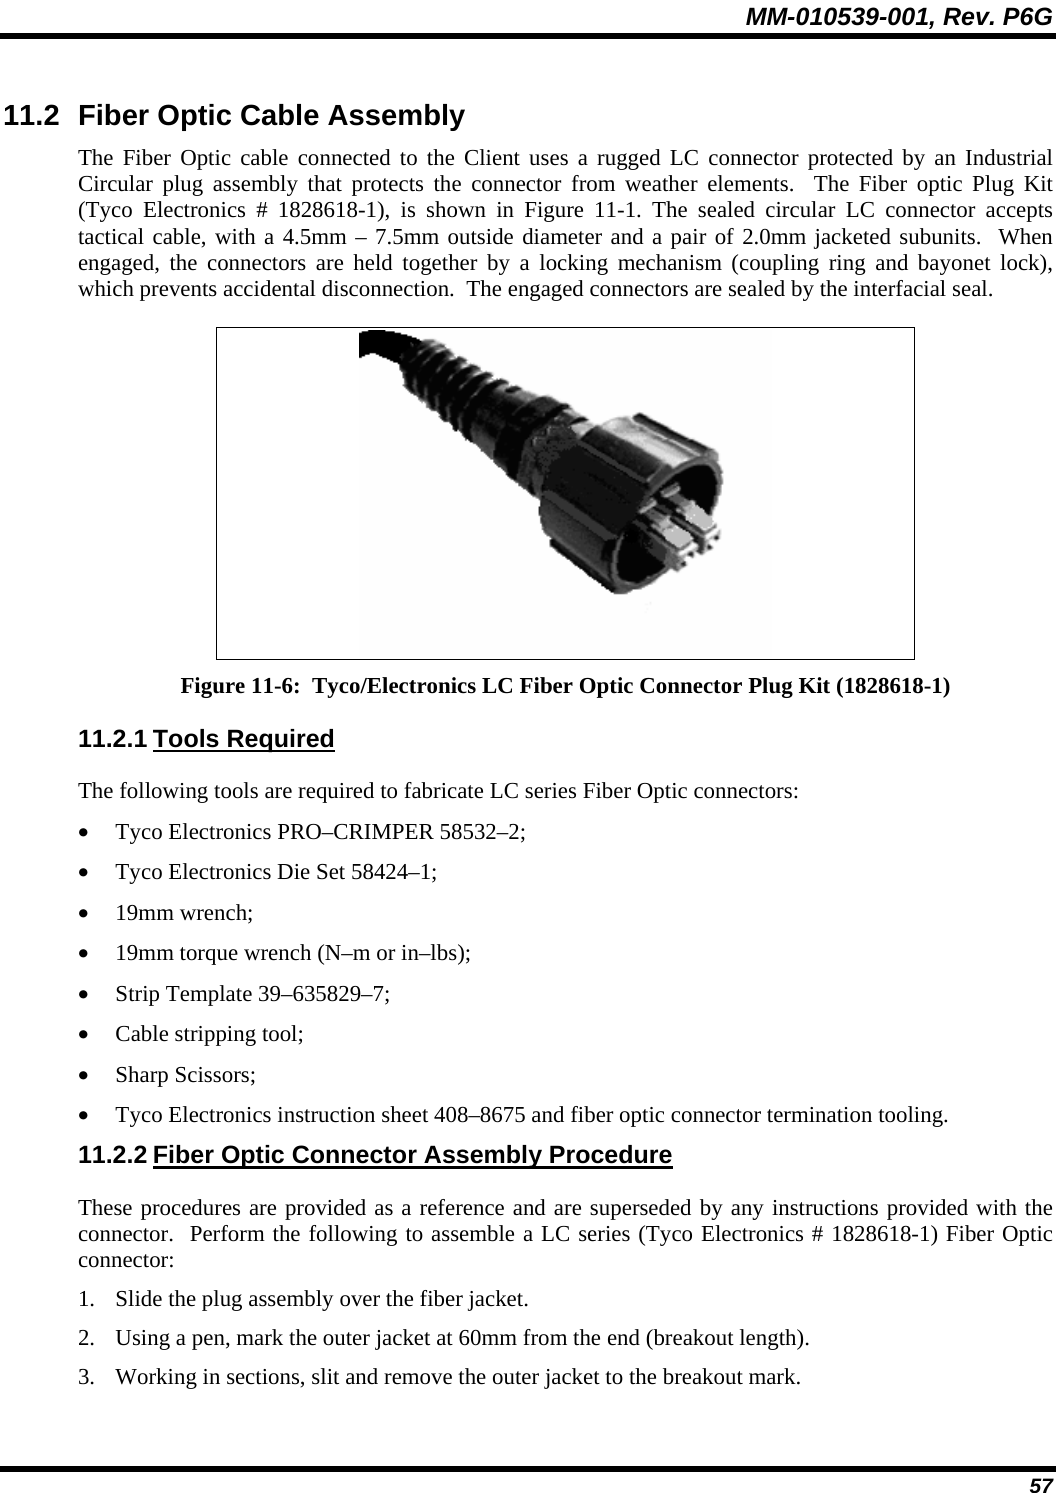 MM-010539-001, Rev. P6G  57 11.2  Fiber Optic Cable Assembly The Fiber Optic cable connected to the Client uses a rugged LC connector protected by an Industrial Circular plug assembly that protects the connector from weather elements.  The Fiber optic Plug Kit (Tyco Electronics # 1828618-1), is shown in Figure 11-1. The sealed circular LC connector accepts tactical cable, with a 4.5mm – 7.5mm outside diameter and a pair of 2.0mm jacketed subunits.  When engaged, the connectors are held together by a locking mechanism (coupling ring and bayonet lock), which prevents accidental disconnection.  The engaged connectors are sealed by the interfacial seal.  Figure 11-6:  Tyco/Electronics LC Fiber Optic Connector Plug Kit (1828618-1) 11.2.1 Tools Required The following tools are required to fabricate LC series Fiber Optic connectors: • Tyco Electronics PRO–CRIMPER 58532–2; • Tyco Electronics Die Set 58424–1; • 19mm wrench; • 19mm torque wrench (N–m or in–lbs); • Strip Template 39–635829–7; • Cable stripping tool; • Sharp Scissors; • Tyco Electronics instruction sheet 408–8675 and fiber optic connector termination tooling. 11.2.2 Fiber Optic Connector Assembly Procedure These procedures are provided as a reference and are superseded by any instructions provided with the connector.  Perform the following to assemble a LC series (Tyco Electronics # 1828618-1) Fiber Optic connector: 1. Slide the plug assembly over the fiber jacket. 2. Using a pen, mark the outer jacket at 60mm from the end (breakout length). 3. Working in sections, slit and remove the outer jacket to the breakout mark. 